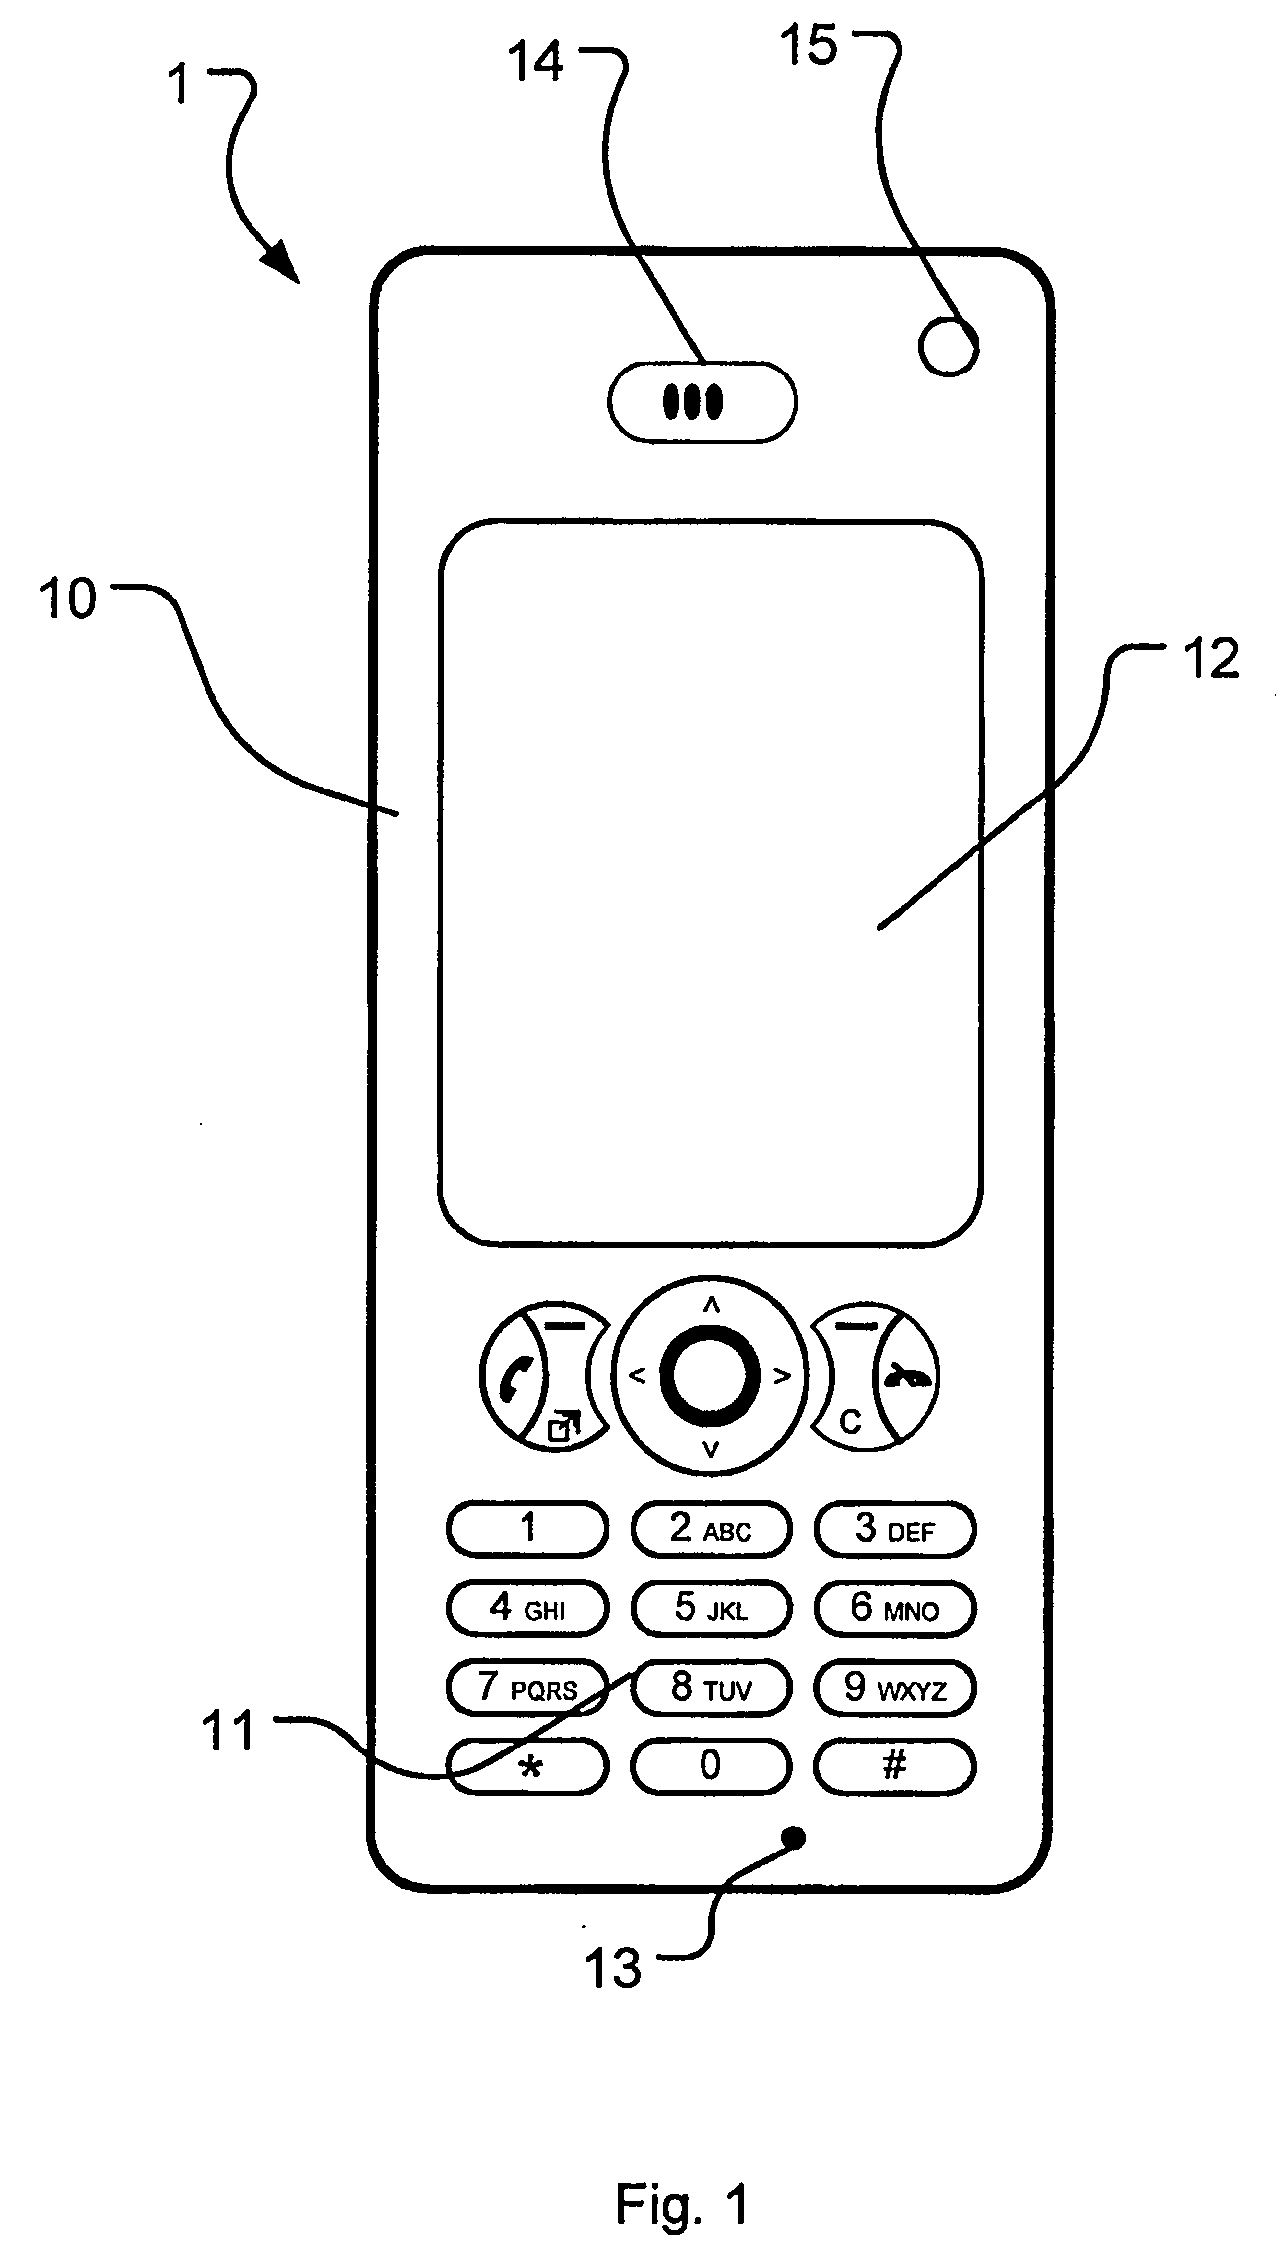 Method and system for establishing connection triggered by motion